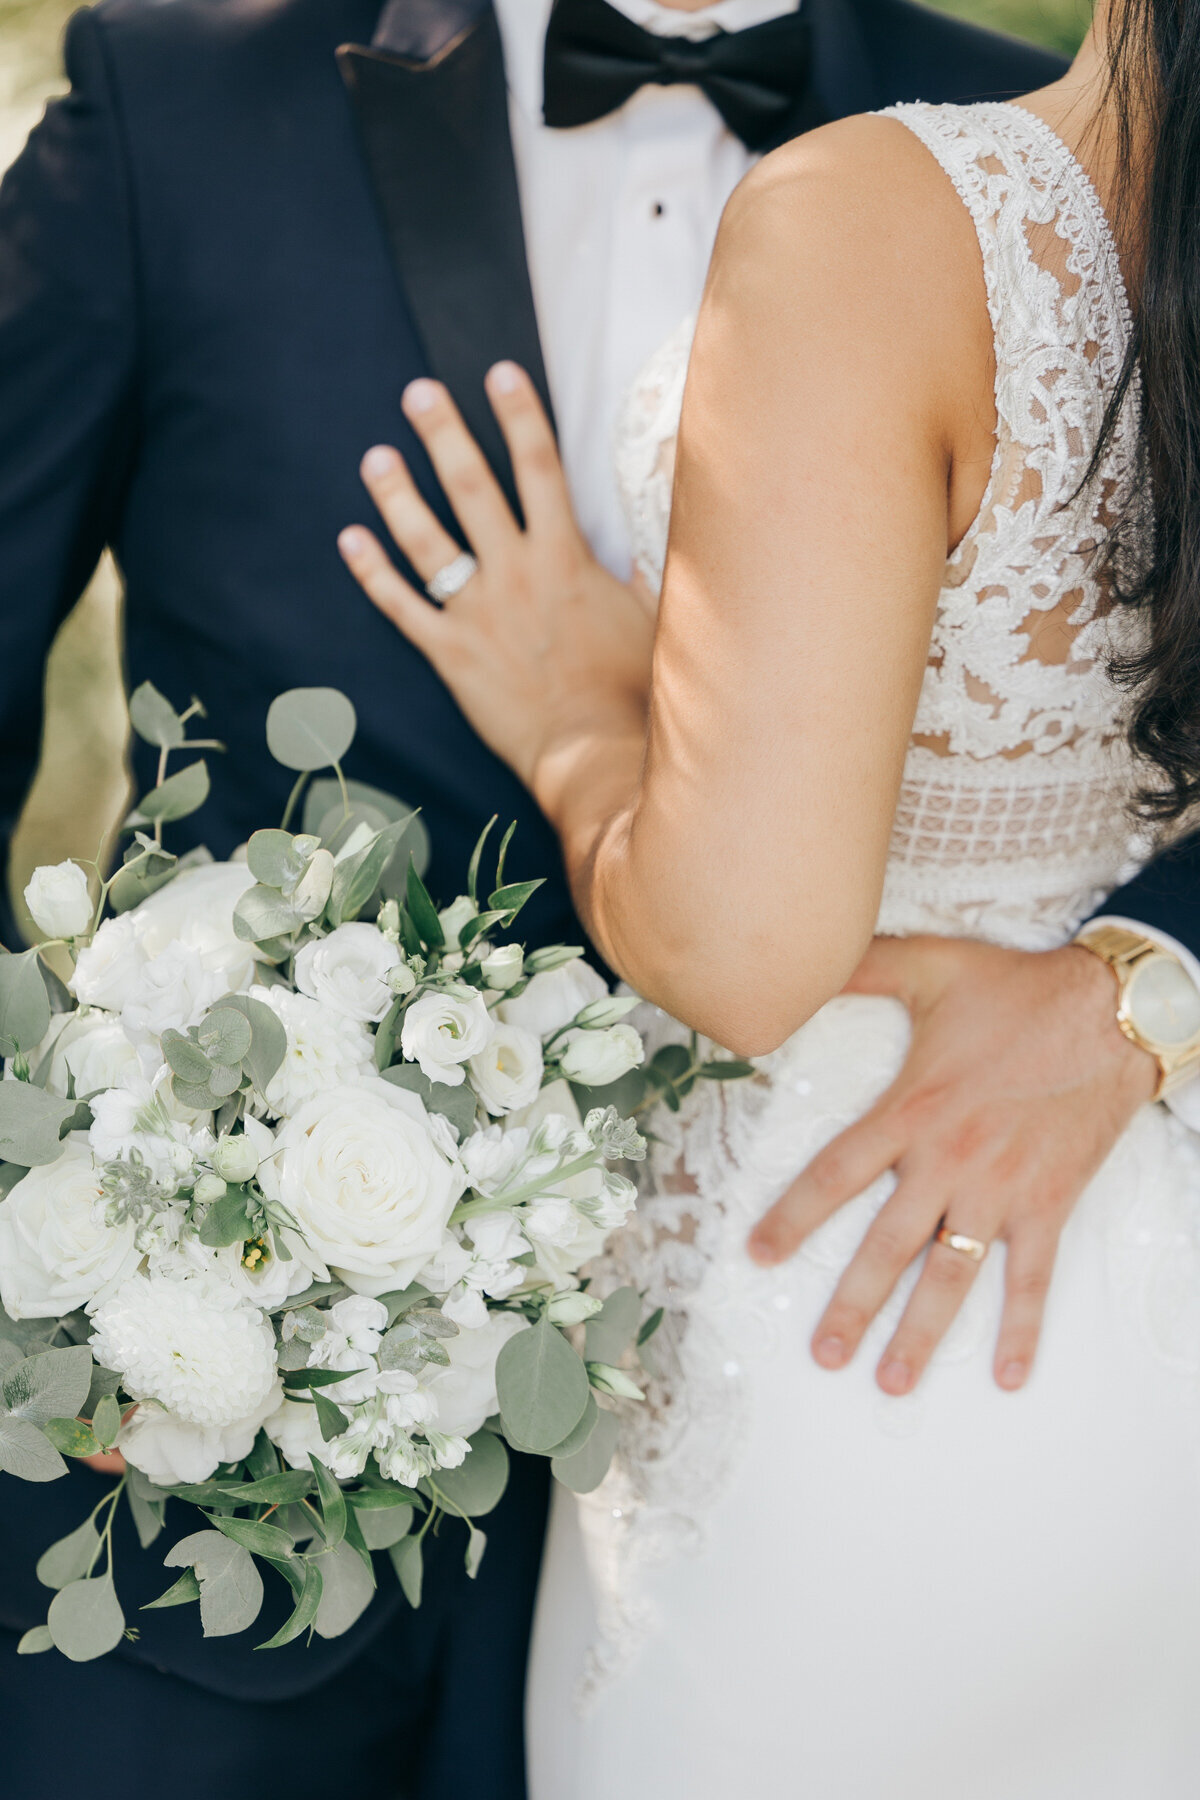 Elegant photo of a bride and groom that showcases both of their wedding rings